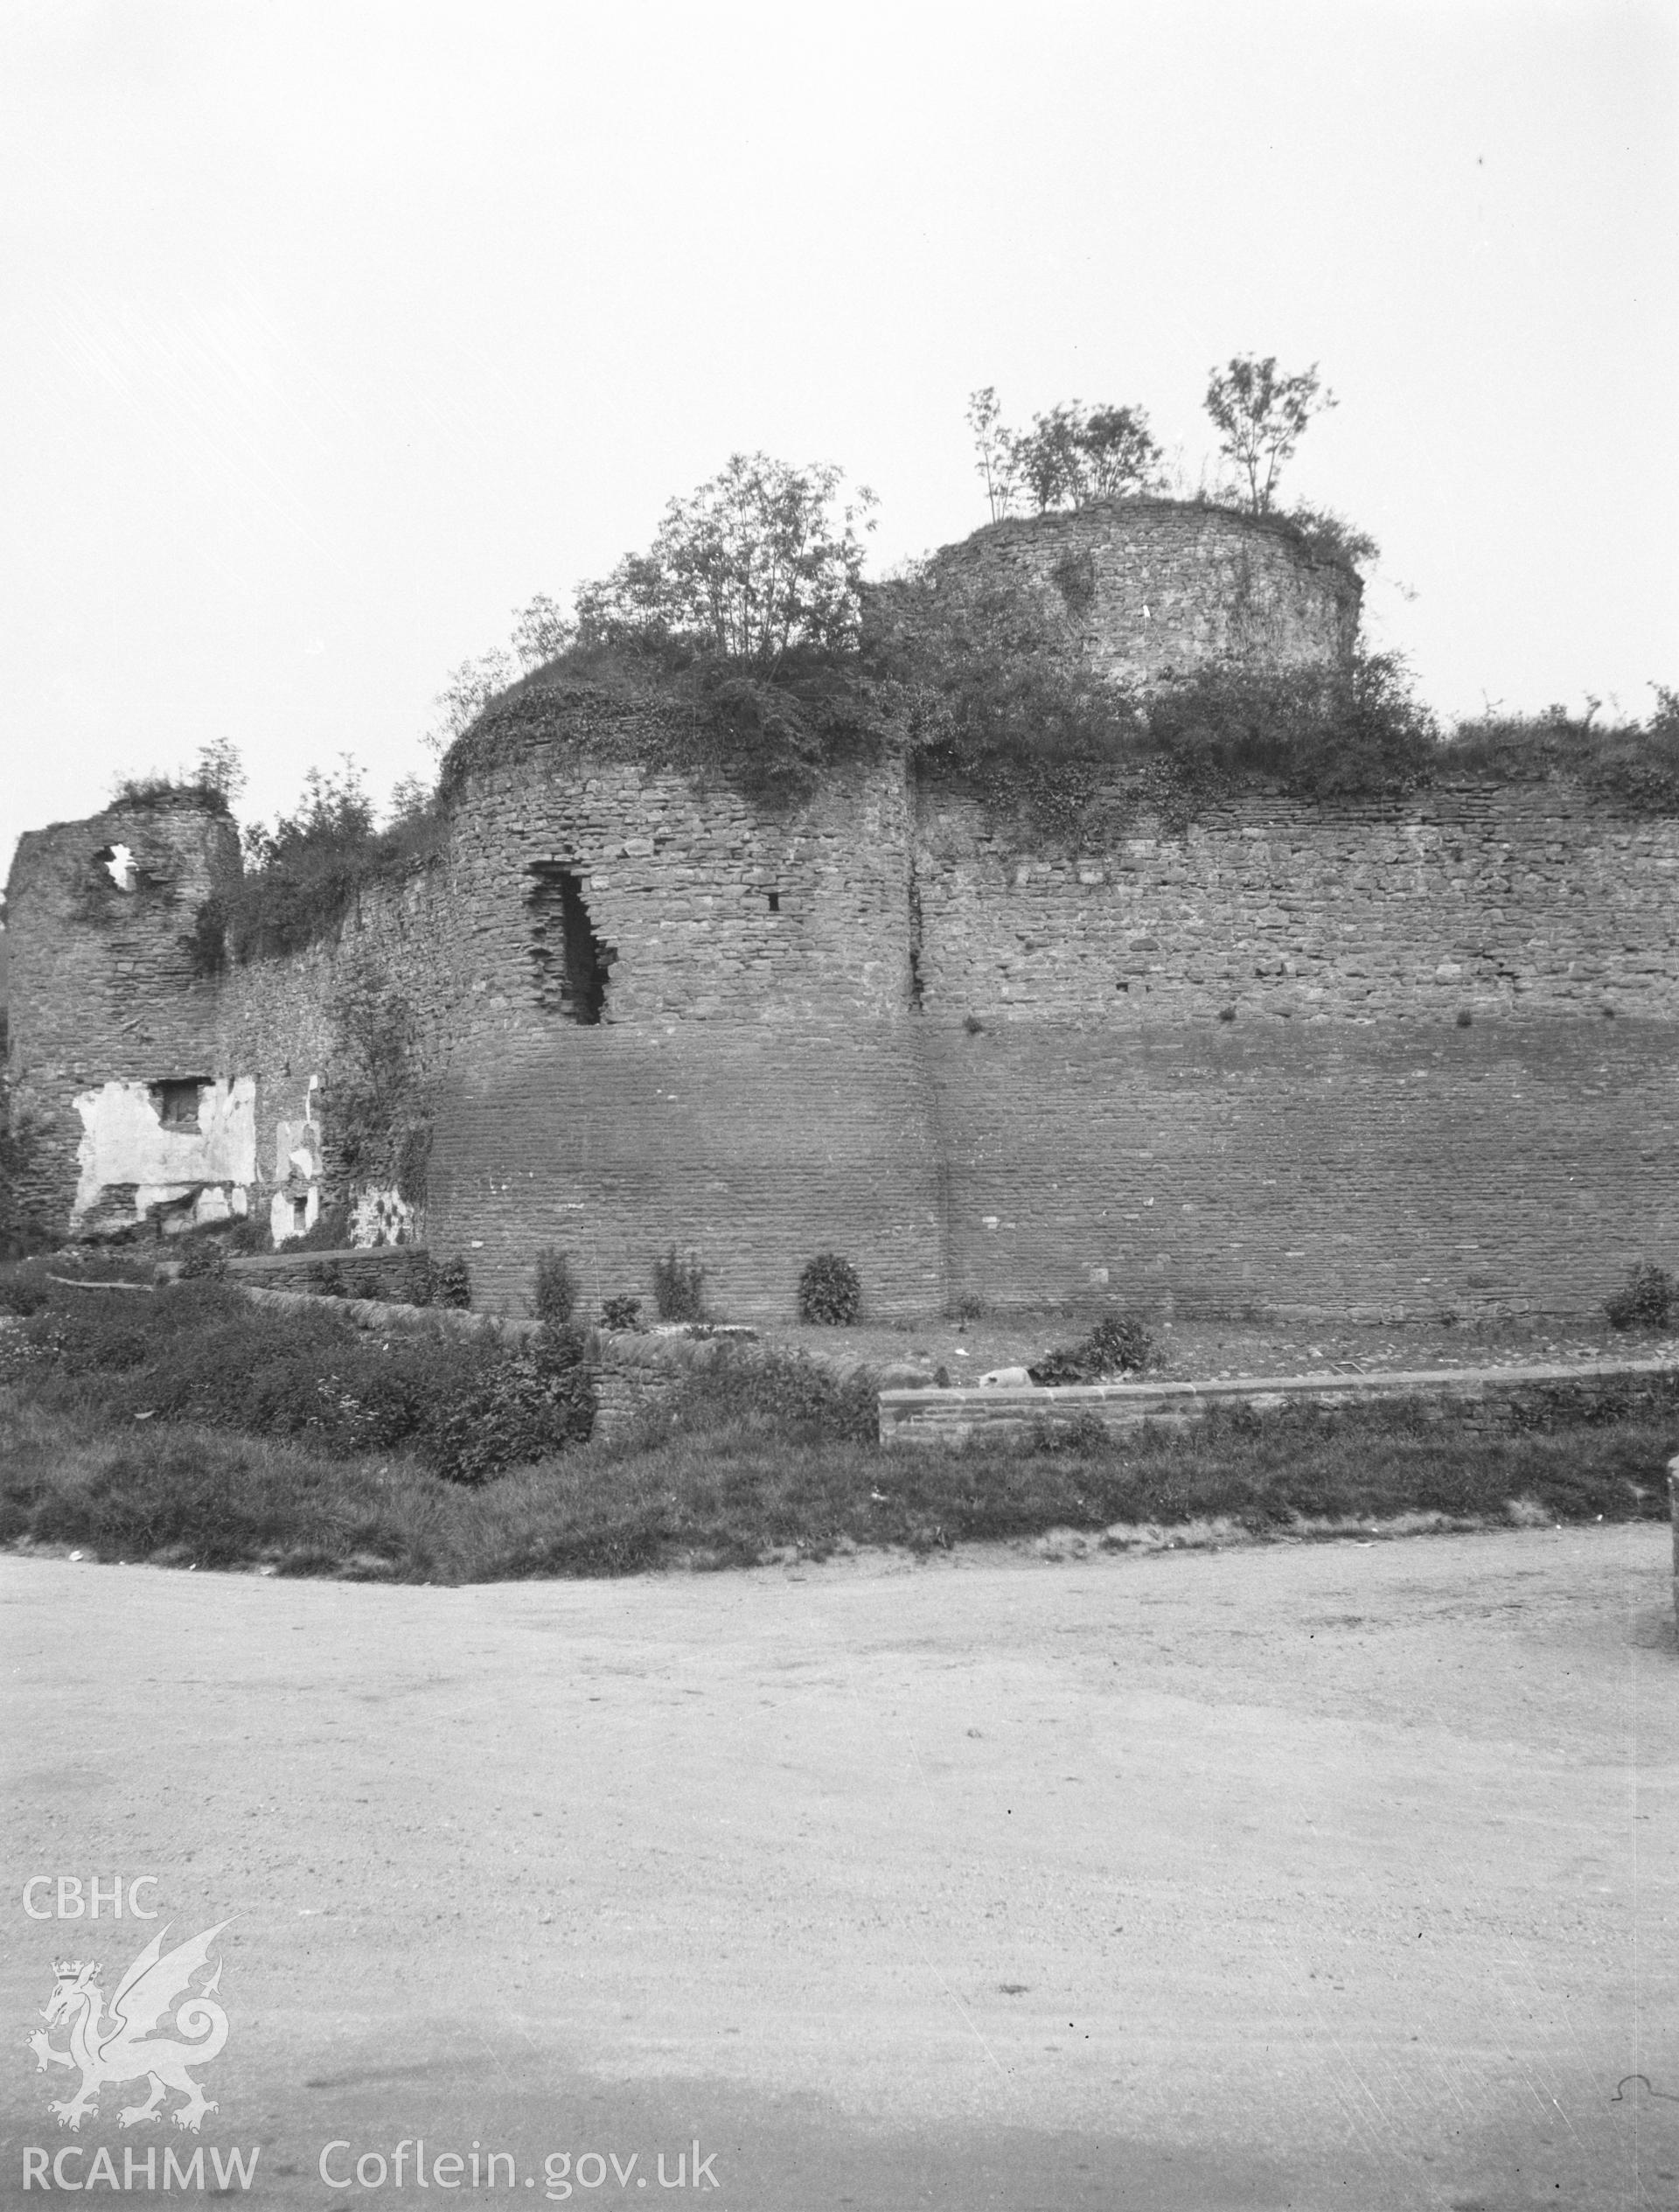 Digital copy of a nitrate negative showing exterior view of top of circular keep behind curtain wall, Skenfrith Castle, taken circa 1934. From the National Building Record Postcard Collection.